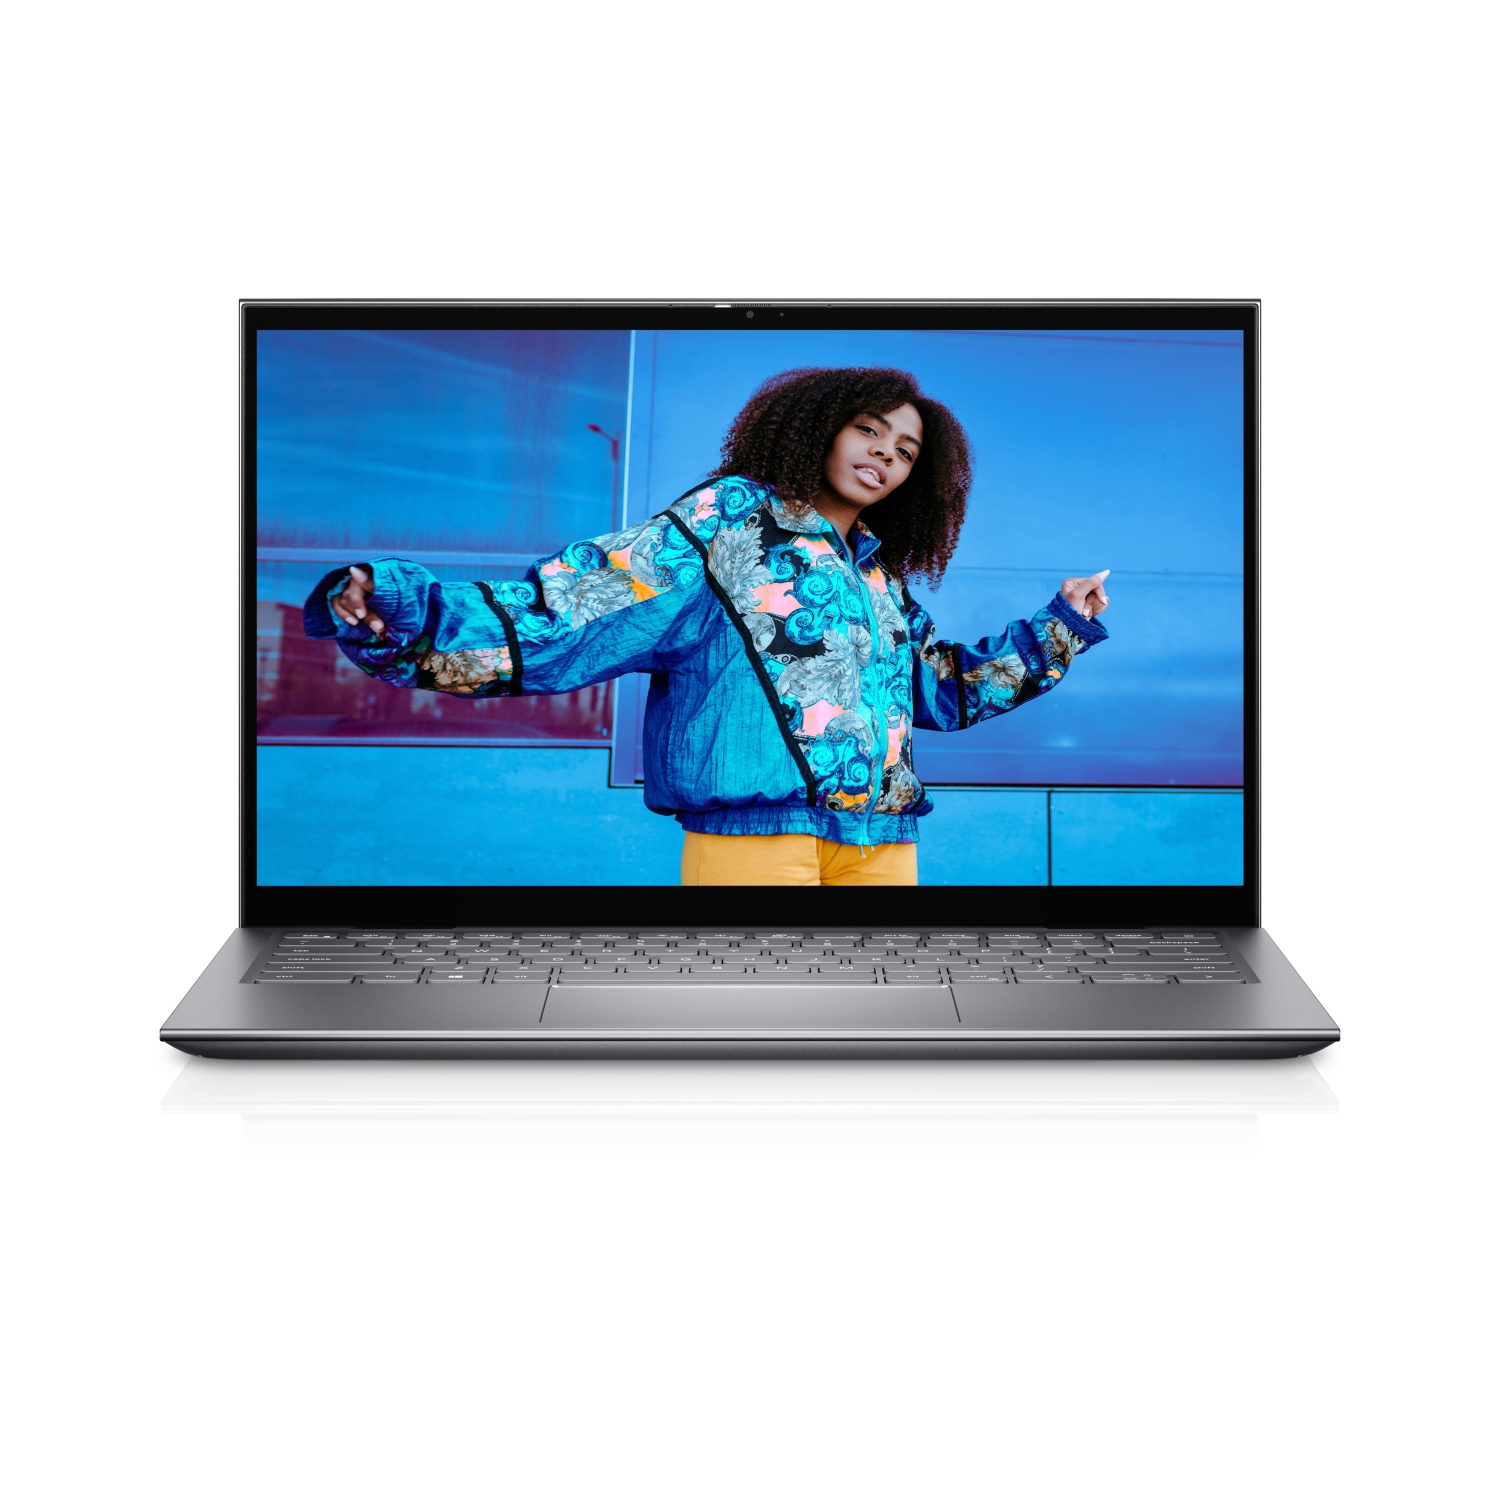 Refurbished (Excellent) – Dell Inspiron 5410 2-in-1 (2021) | 14" FHD Touch | Core i7 - 512GB SSD - 32GB RAM | 4 Cores @ 4.7 GHz - 11th Gen CPU